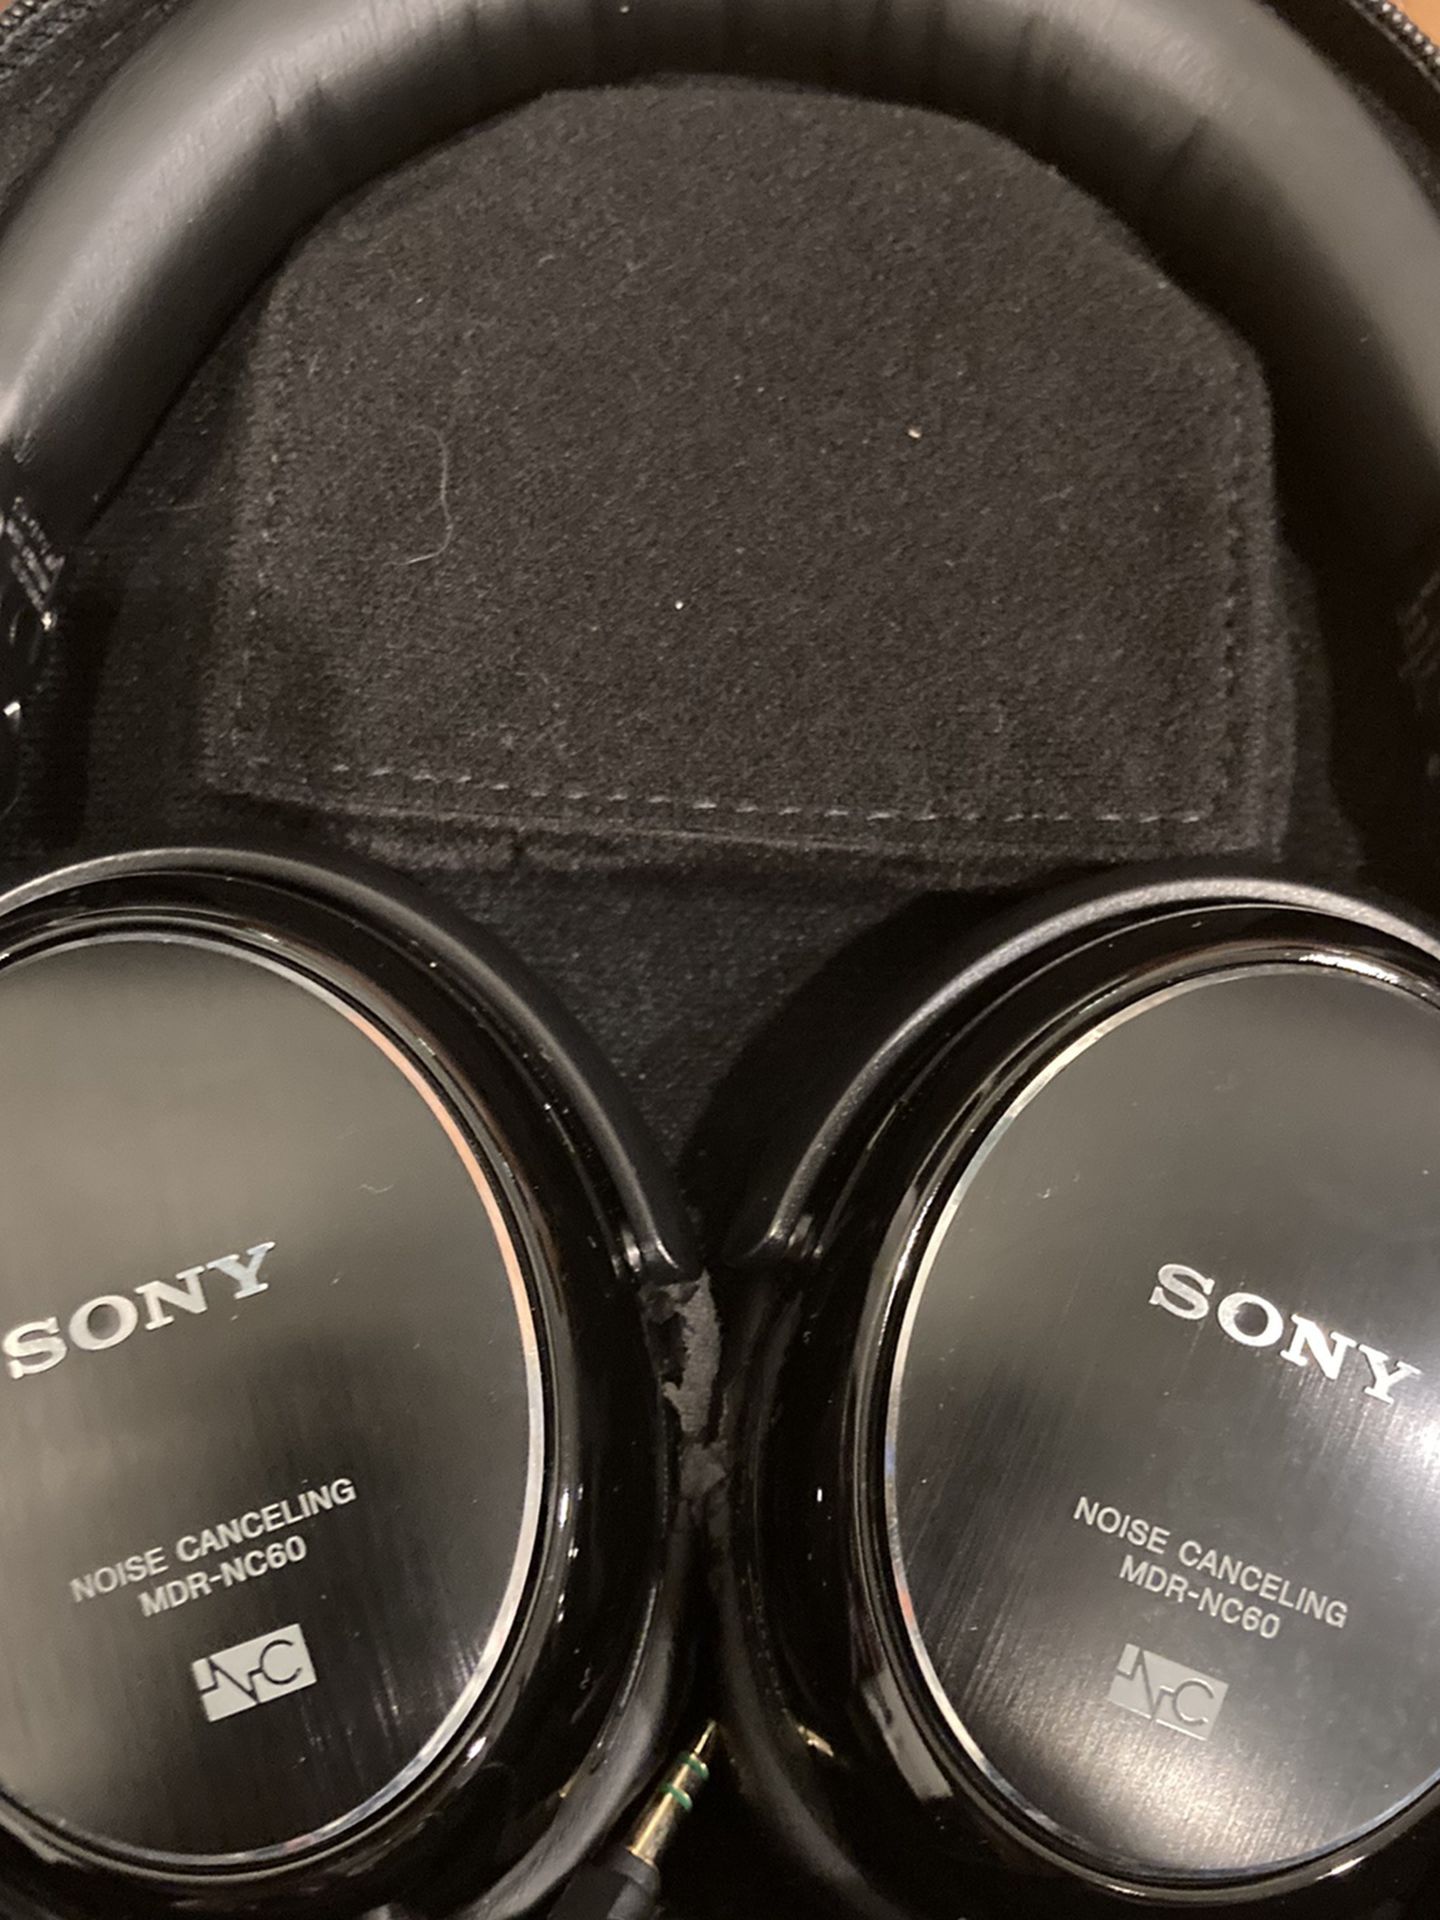 Sony Noise Canceling Headphones mdr-nc60